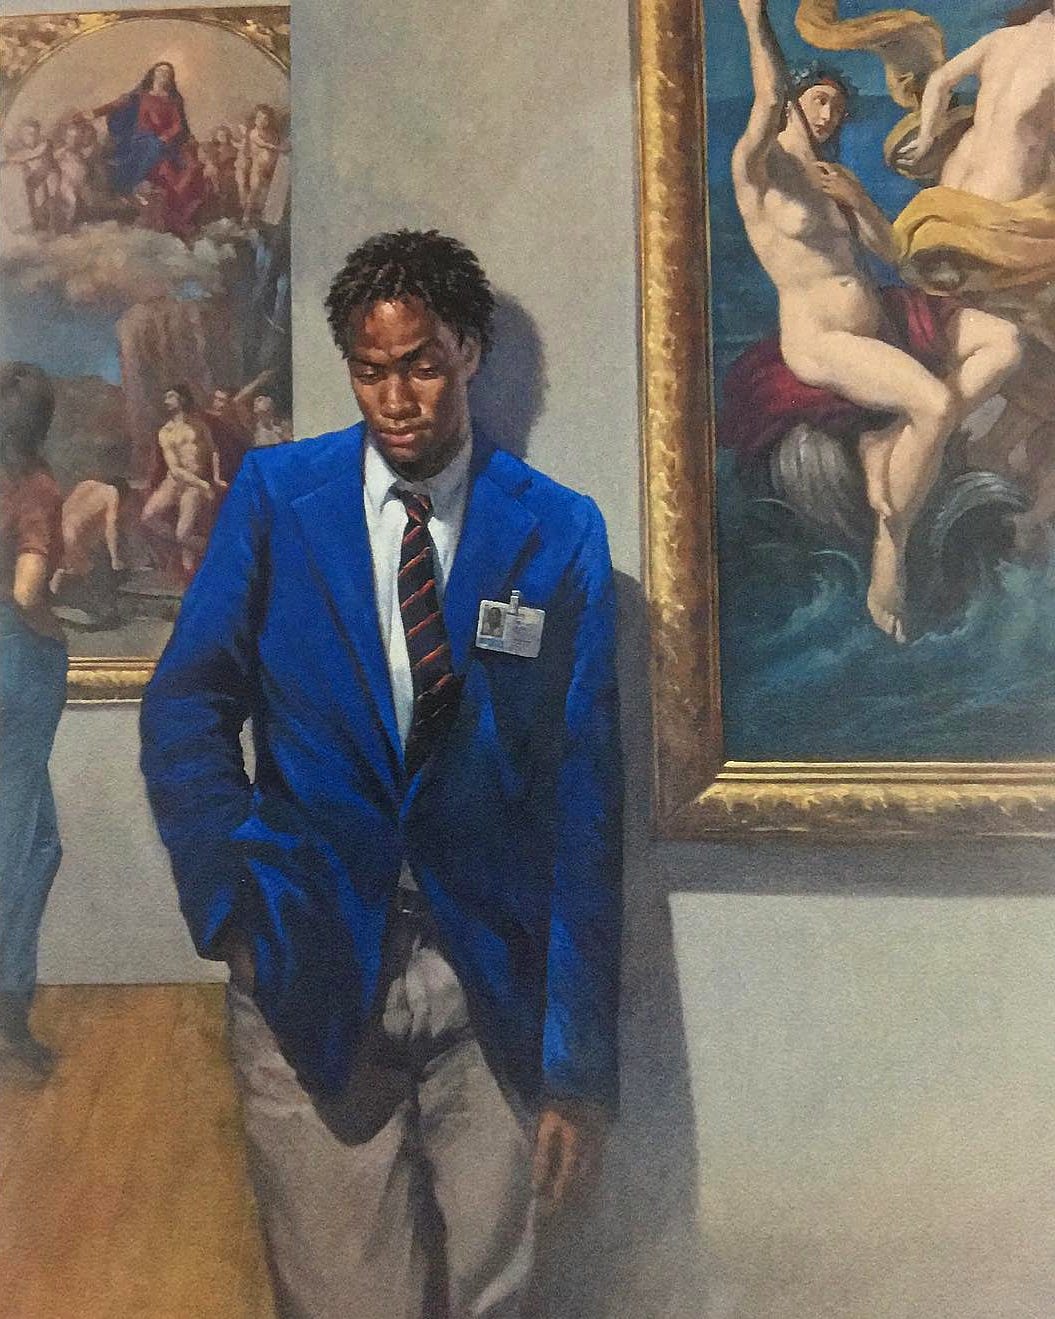 ArtGuard2000 by Dutch artist Deni Ponty. This is a painting showing a slim, tall young black man who is a museum worker, wearing a blue blazer, white shirt and dark tie with chinos. The man is gazing towards the floor and is flanked by seemingly canonical artworks filled with white figuration, suggestive that the normally overlooked museum worker is deserving of our contemplation instead of the fine art on display.